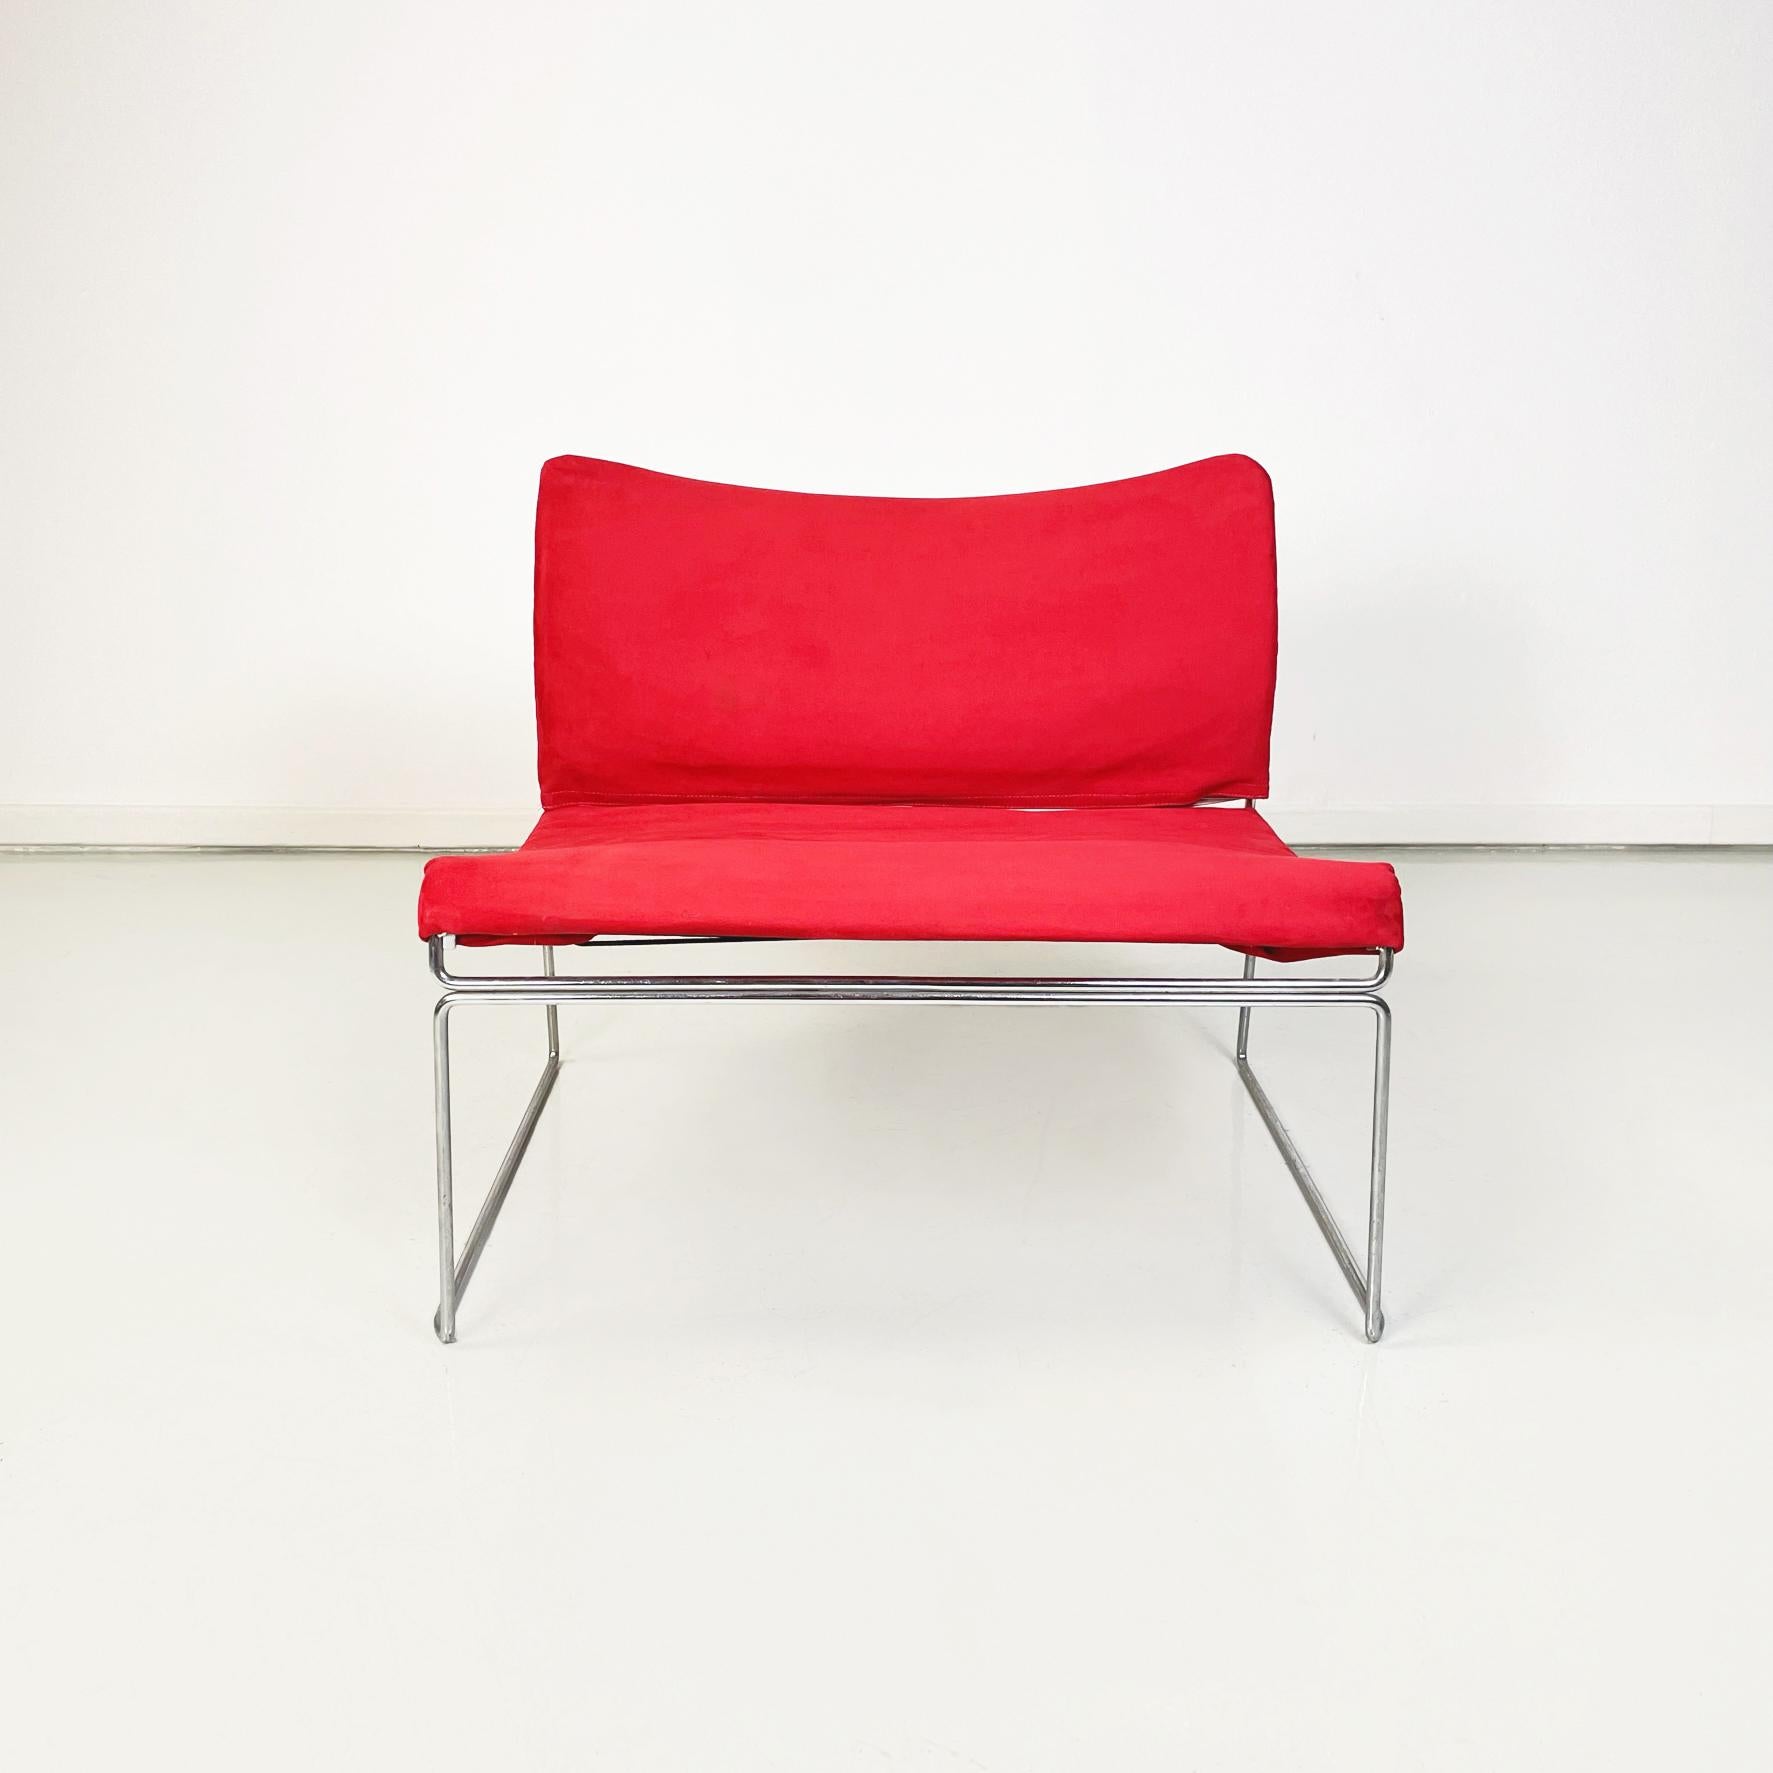 Italian modern Red armchair mod. Saghi by Kazuhide Takahama for Gavina, 1970s
Iconic and elegant armchair mod. Saghi with steel rod structure. The seat and back are lightly padded and upholstered in bright red velvet.
Produced by Gavina in 1970s